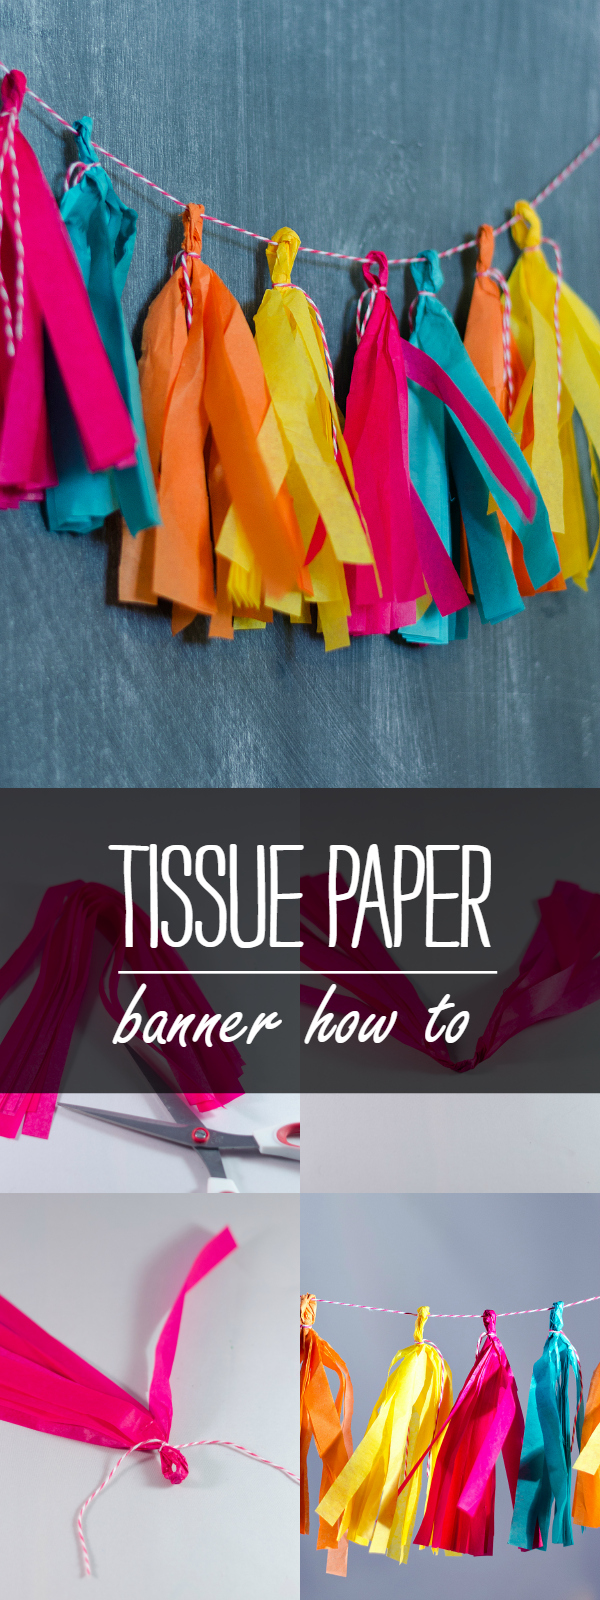 How To Make A Tissue Paper Banner